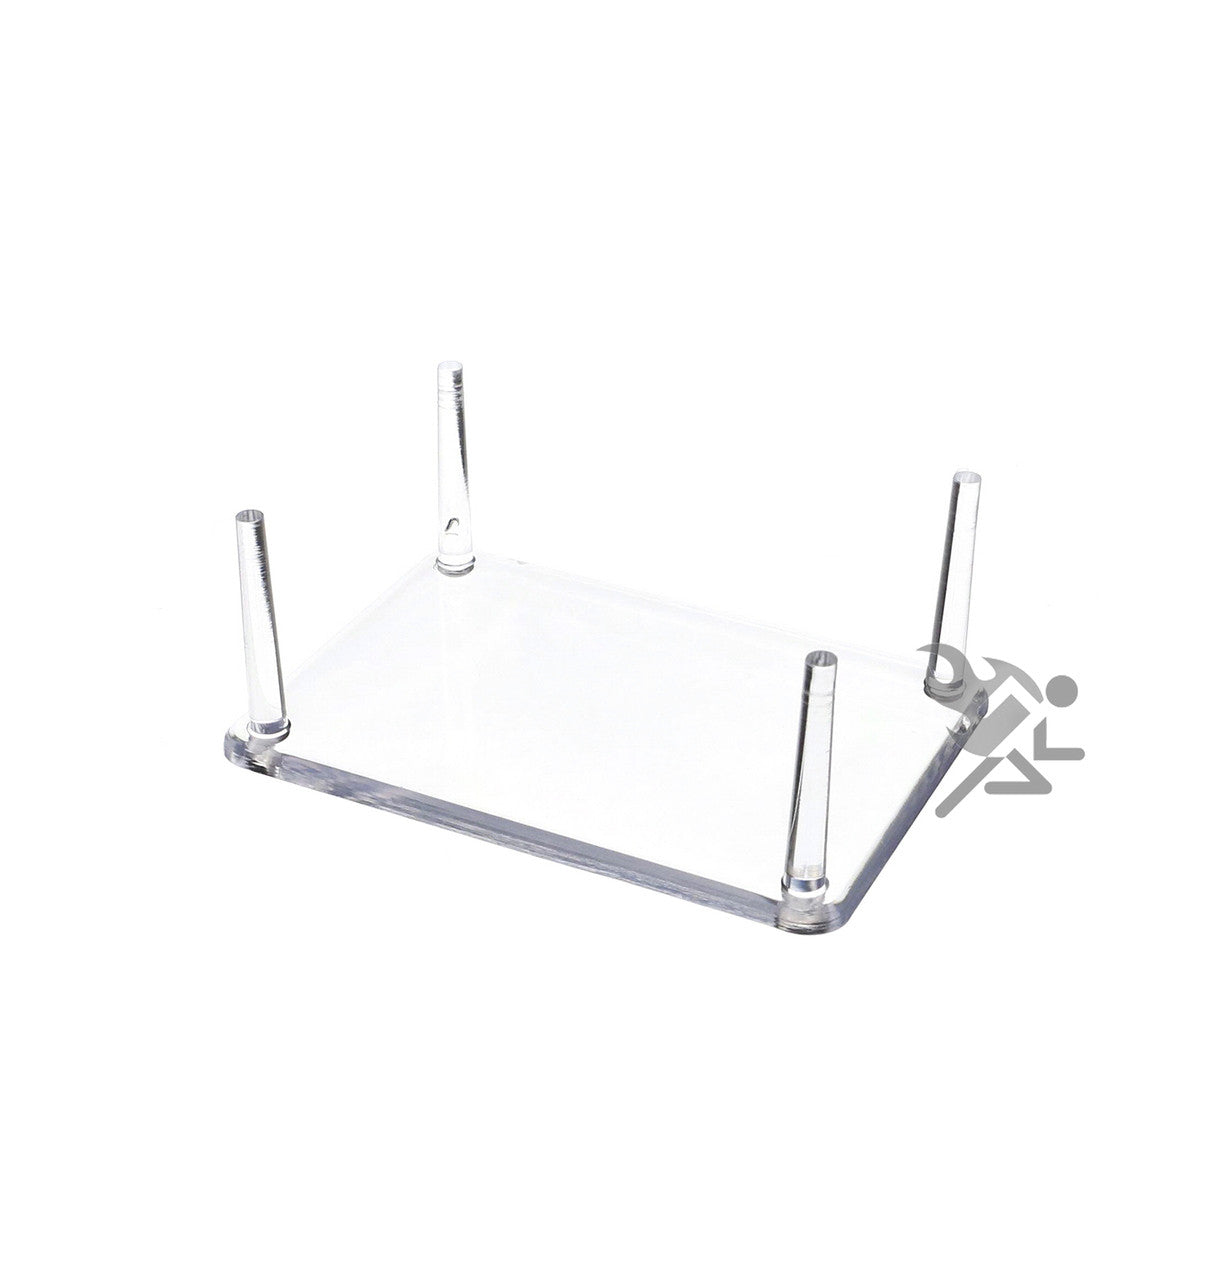 Acrylic 4.5-inch Heavy Duty Plate Display Stand for 5 - 8 Plates